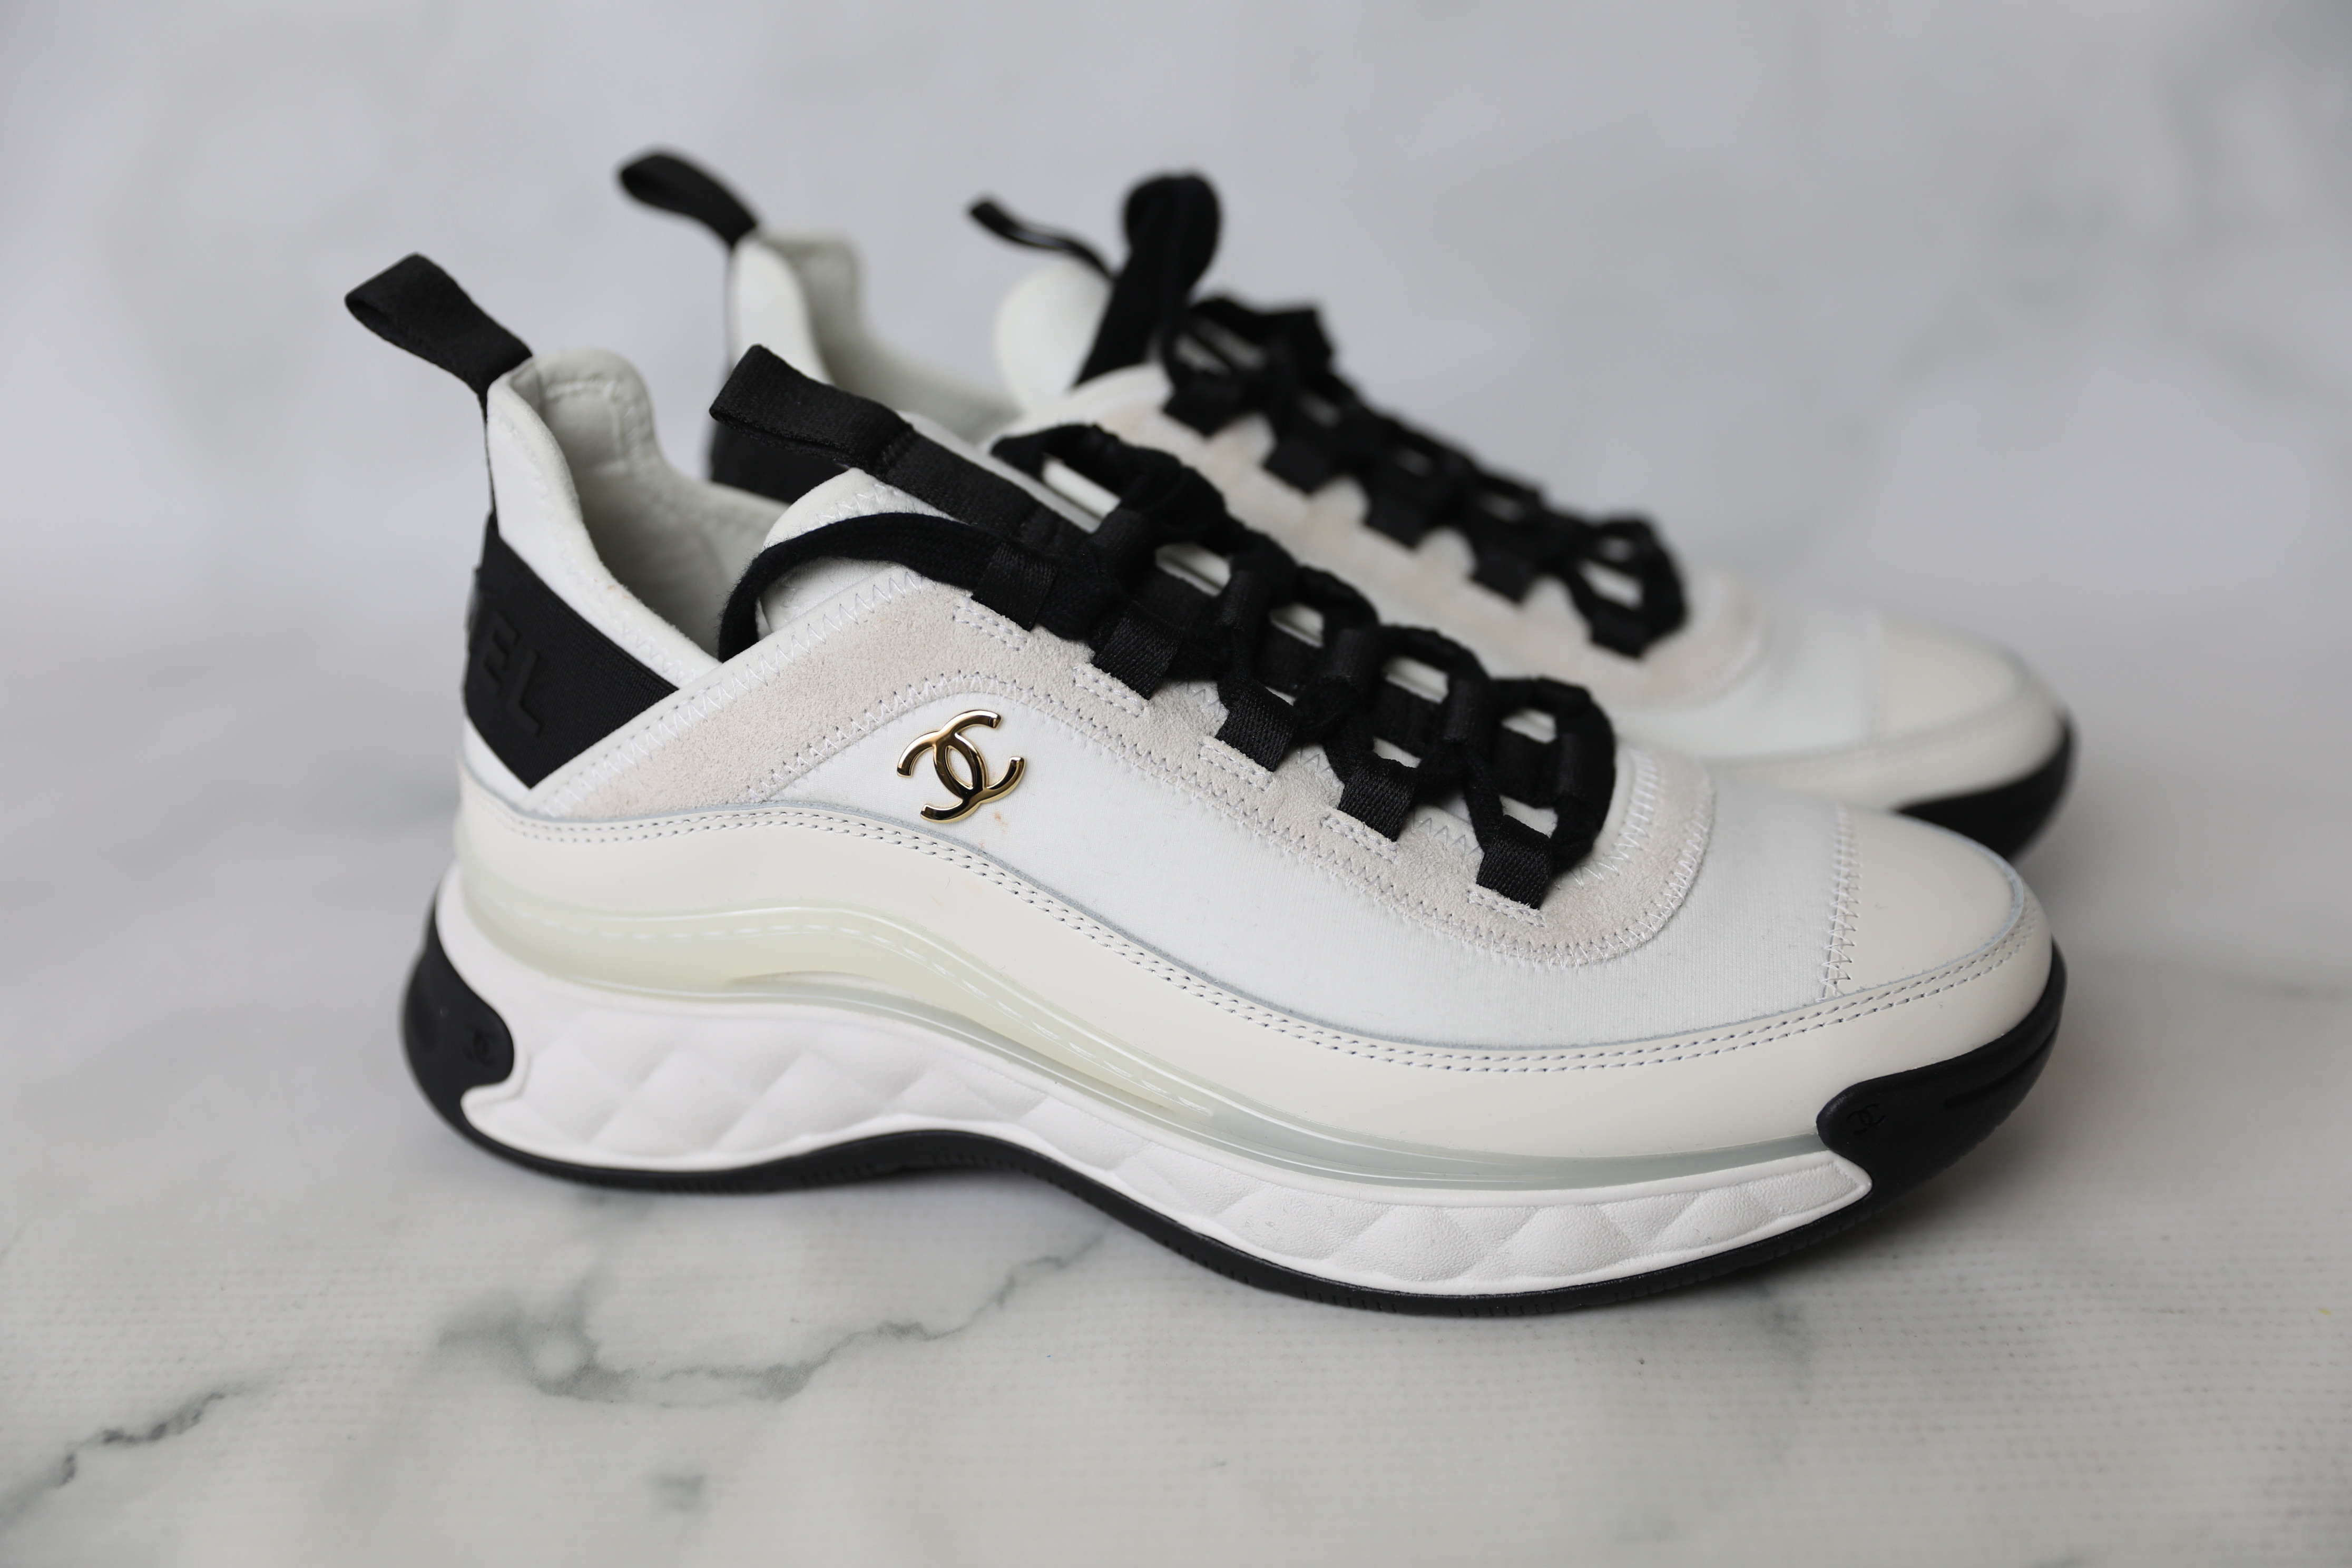 Chanel Shoes Sneakers, White with Black, Size 36.5, New in Box WA001